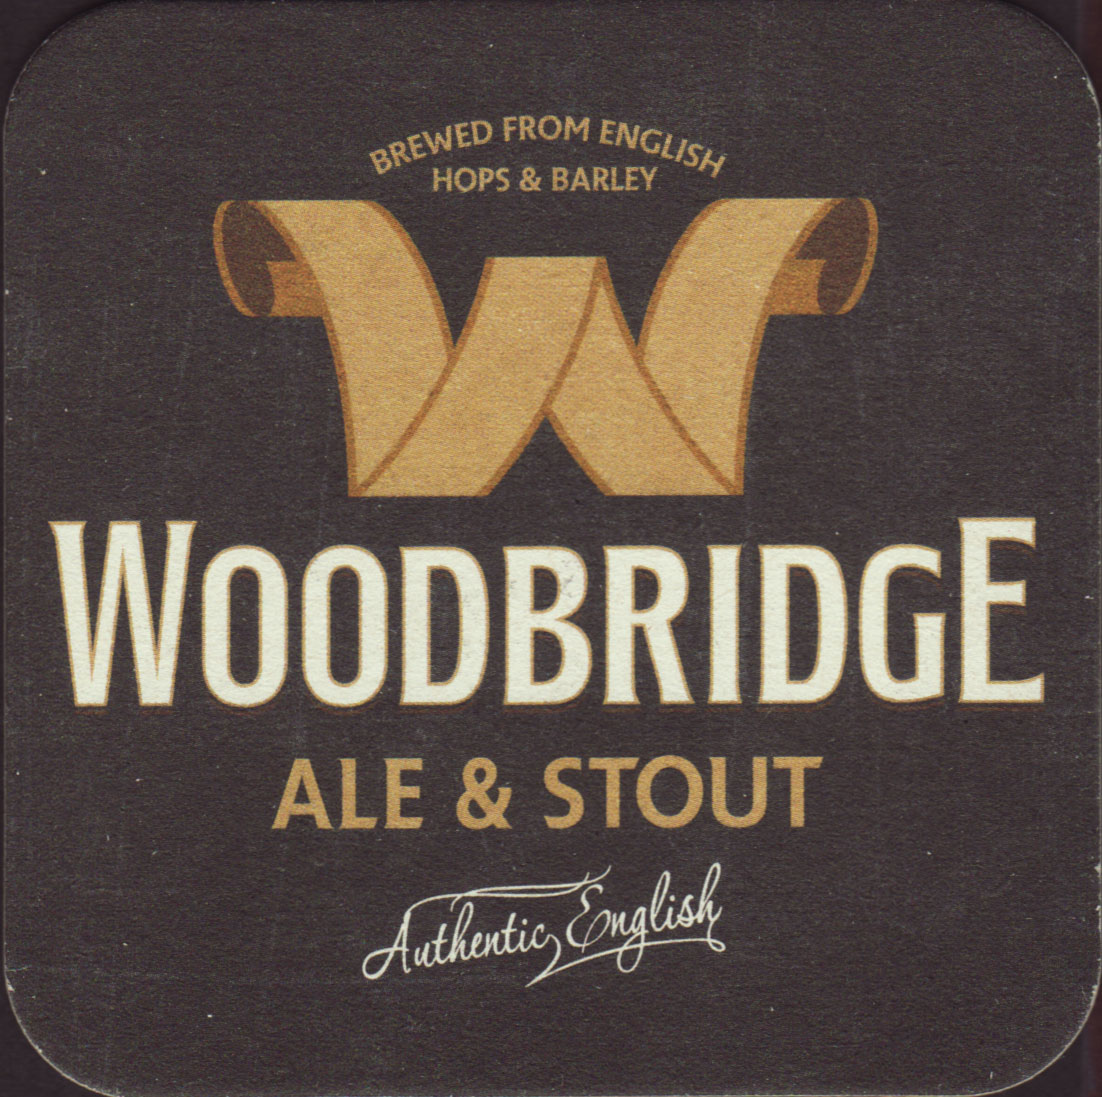 Beer strong Woodbridge/strong - Brewery strong Thwaites/strong - City stron...